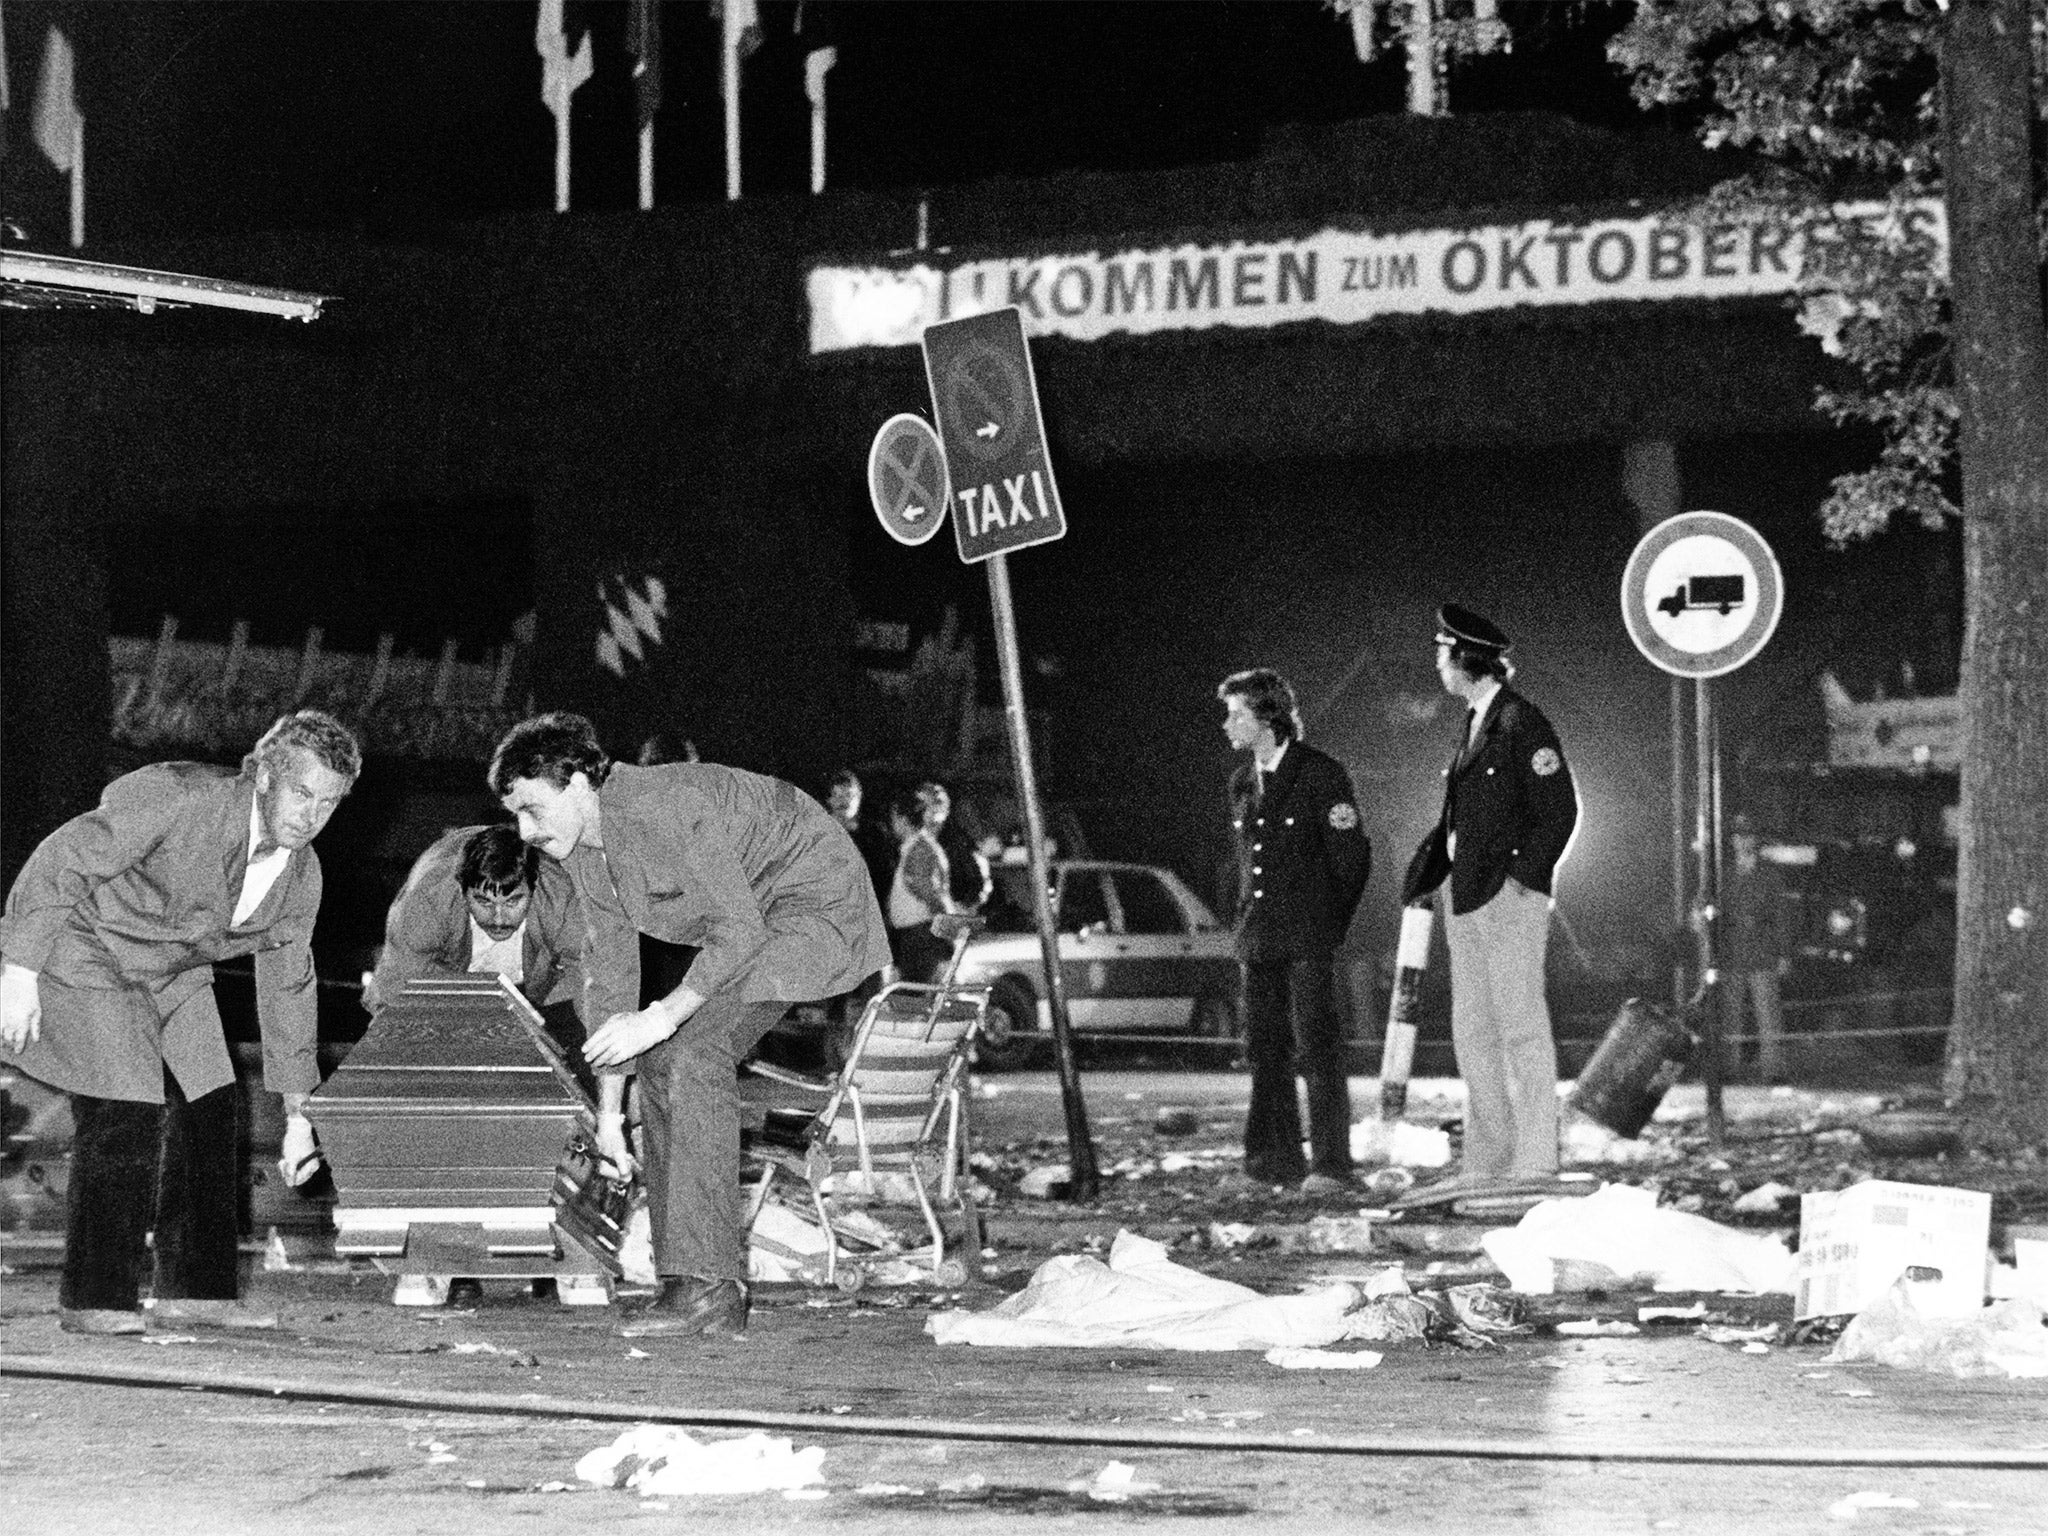 Oktoberfest bomb inquiry: Severed hand may prove 1980 attack was carried  out by neo-Nazis and not a lone wolf, The Independent